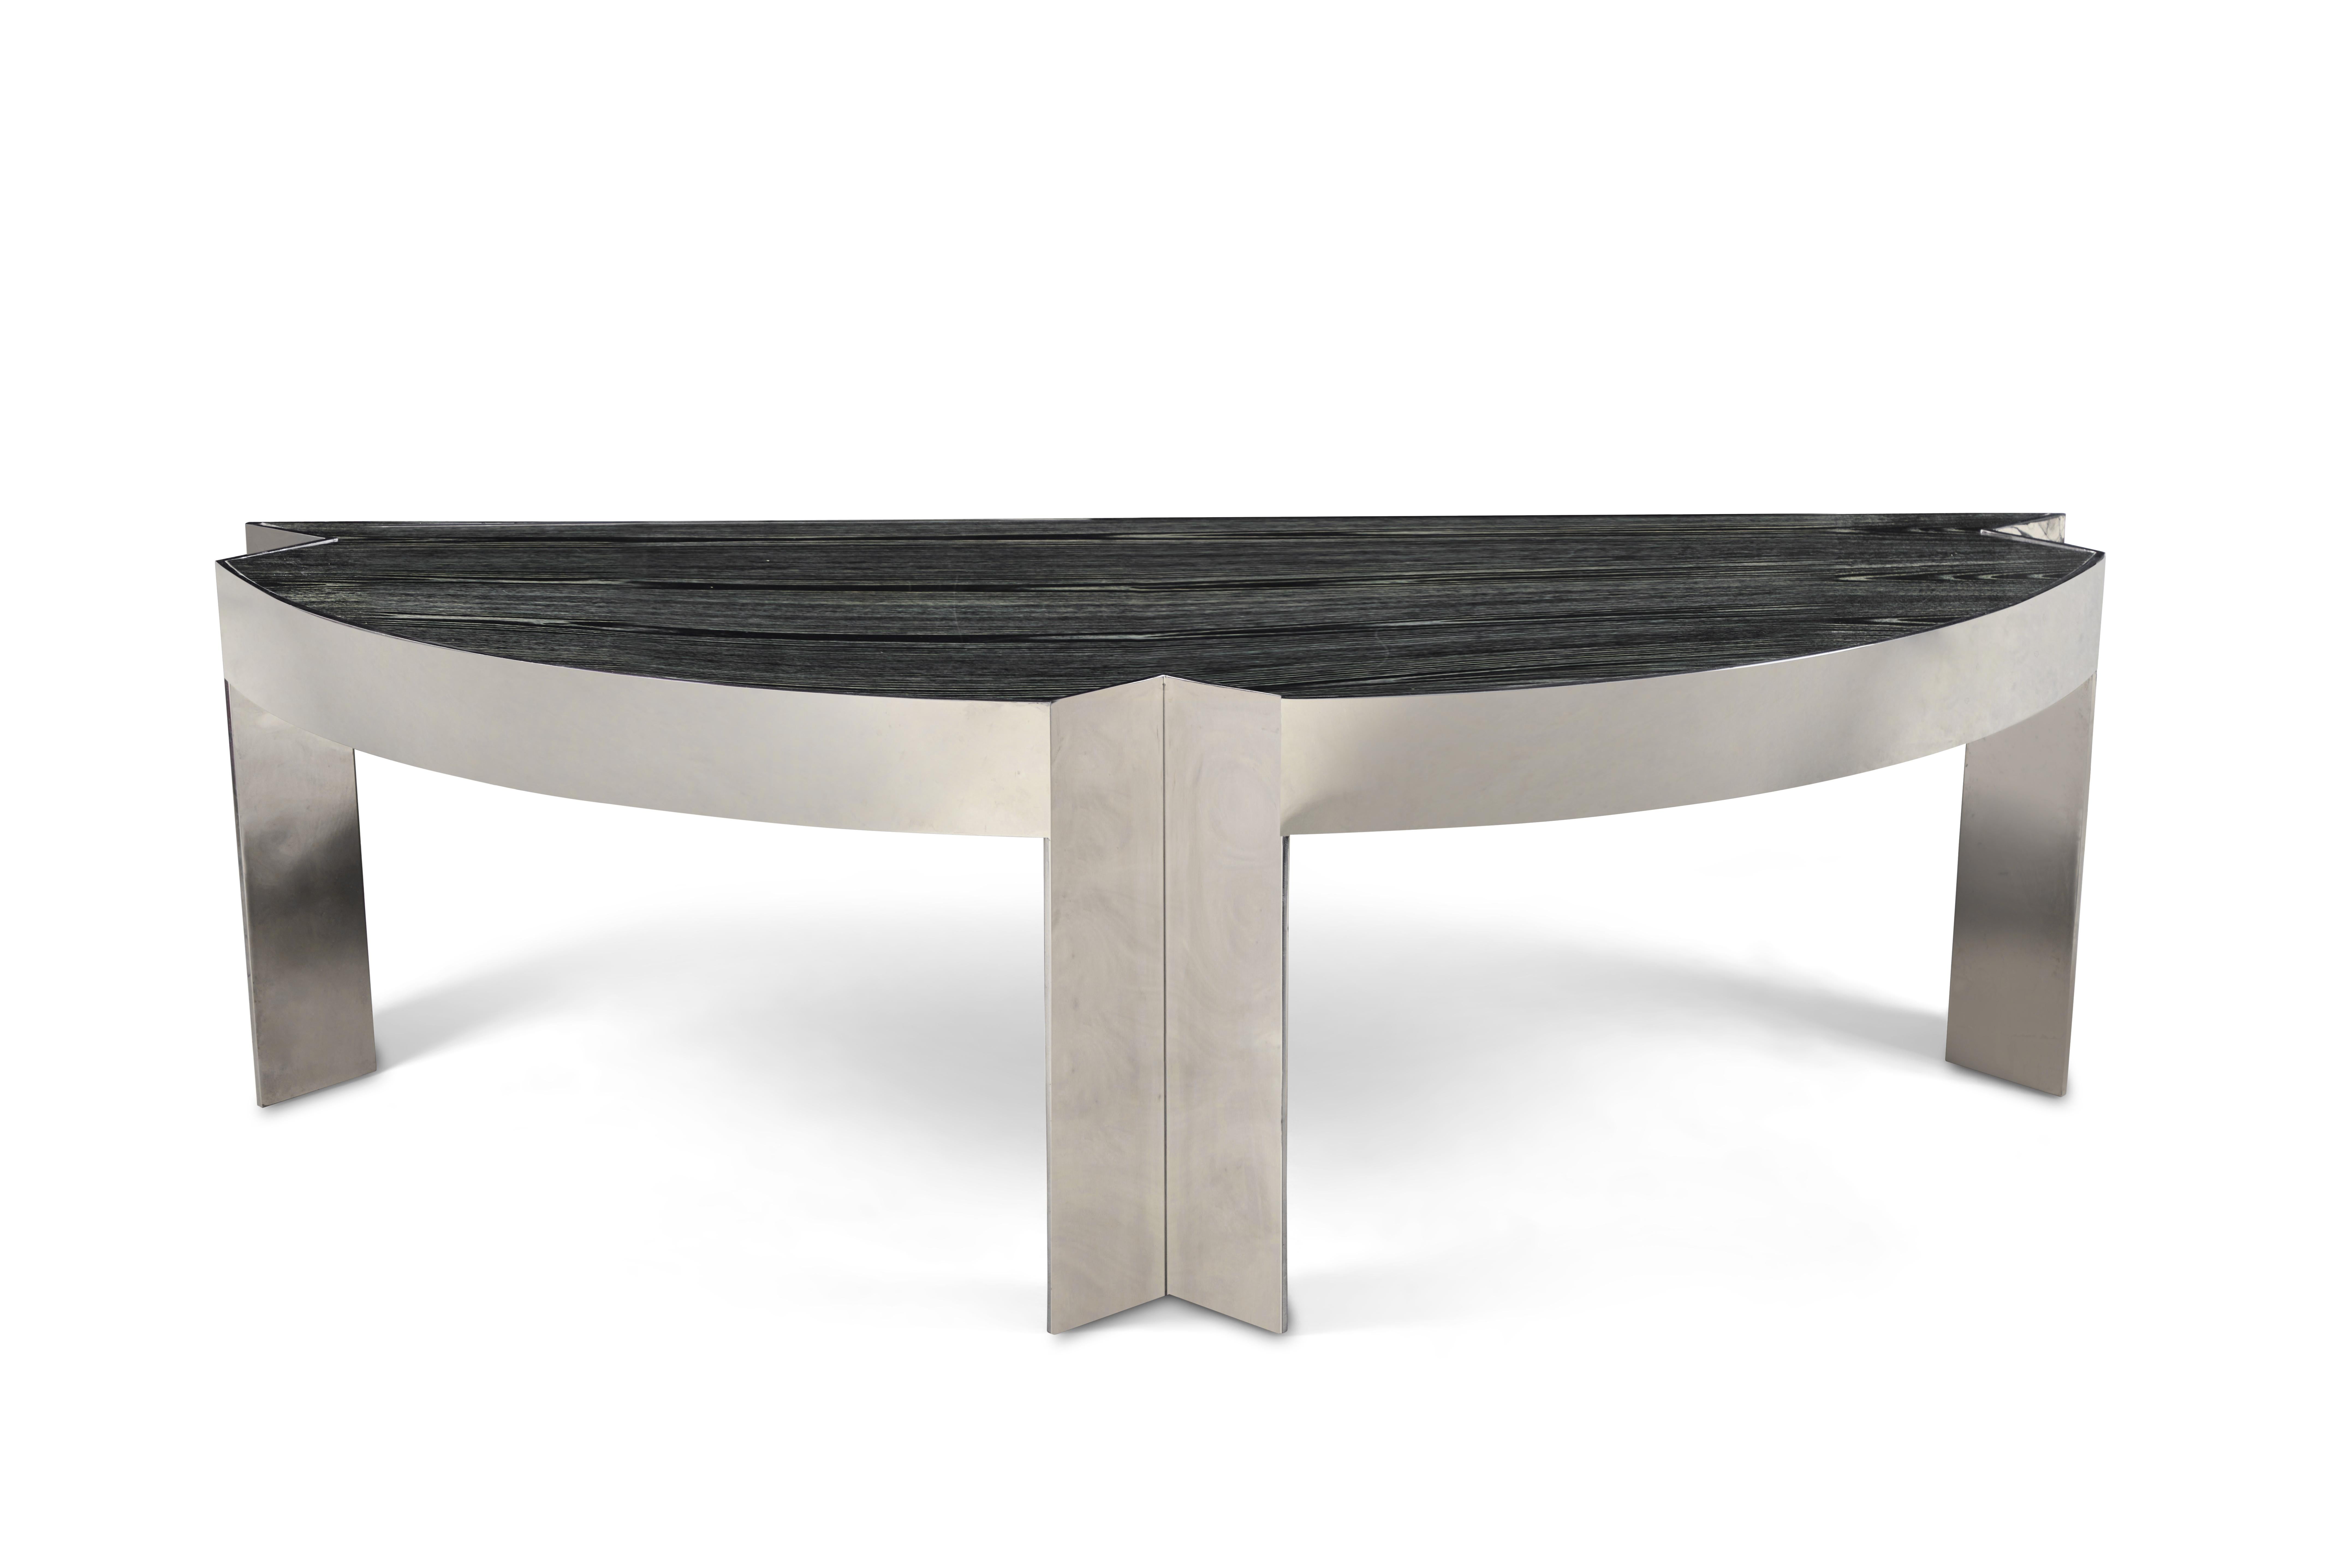 Monumentally scaled desk of polished stainless steel and charcoal gray zebra wood by Leon Rosen for Pace, 1980's. This is the ultimate executive desk and a true statement piece.